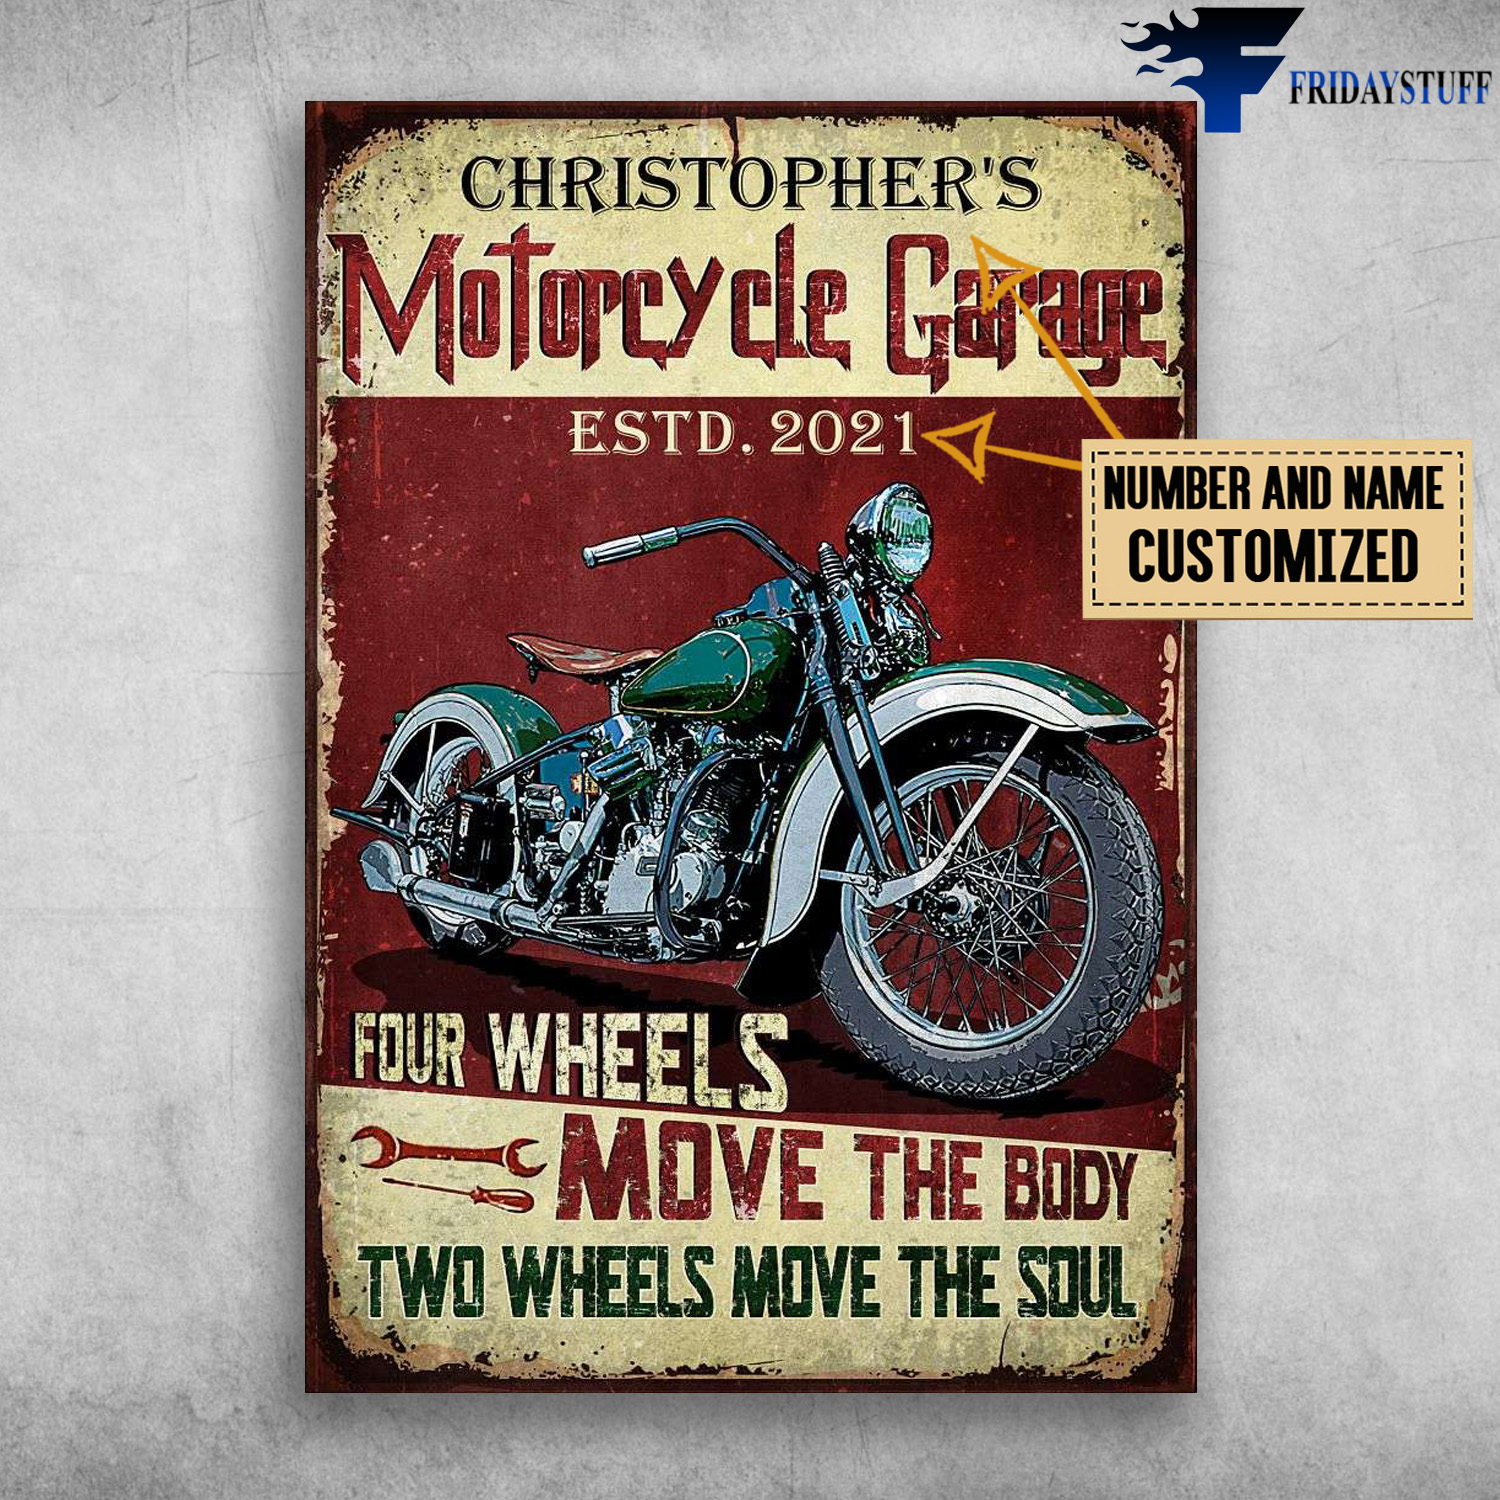 Motorcycle Garage, Four Whells, Move The Body, Two Wheels Move The Soul